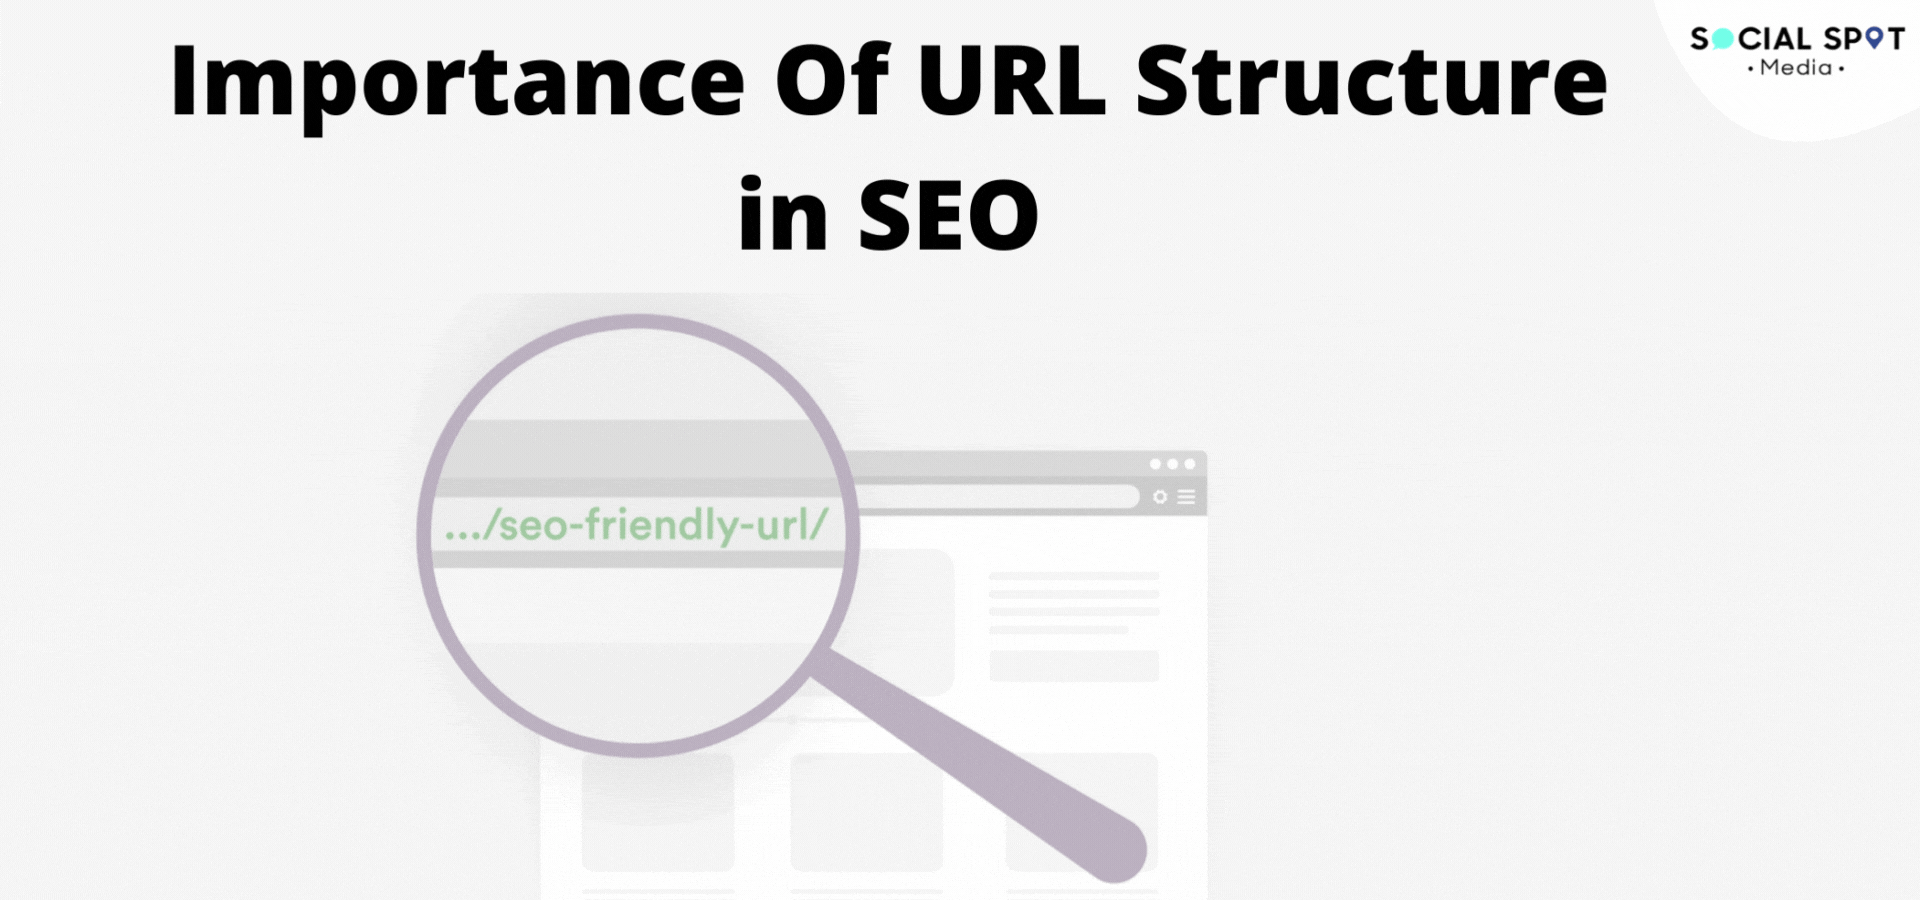 Importance Of URL Structure in SEO